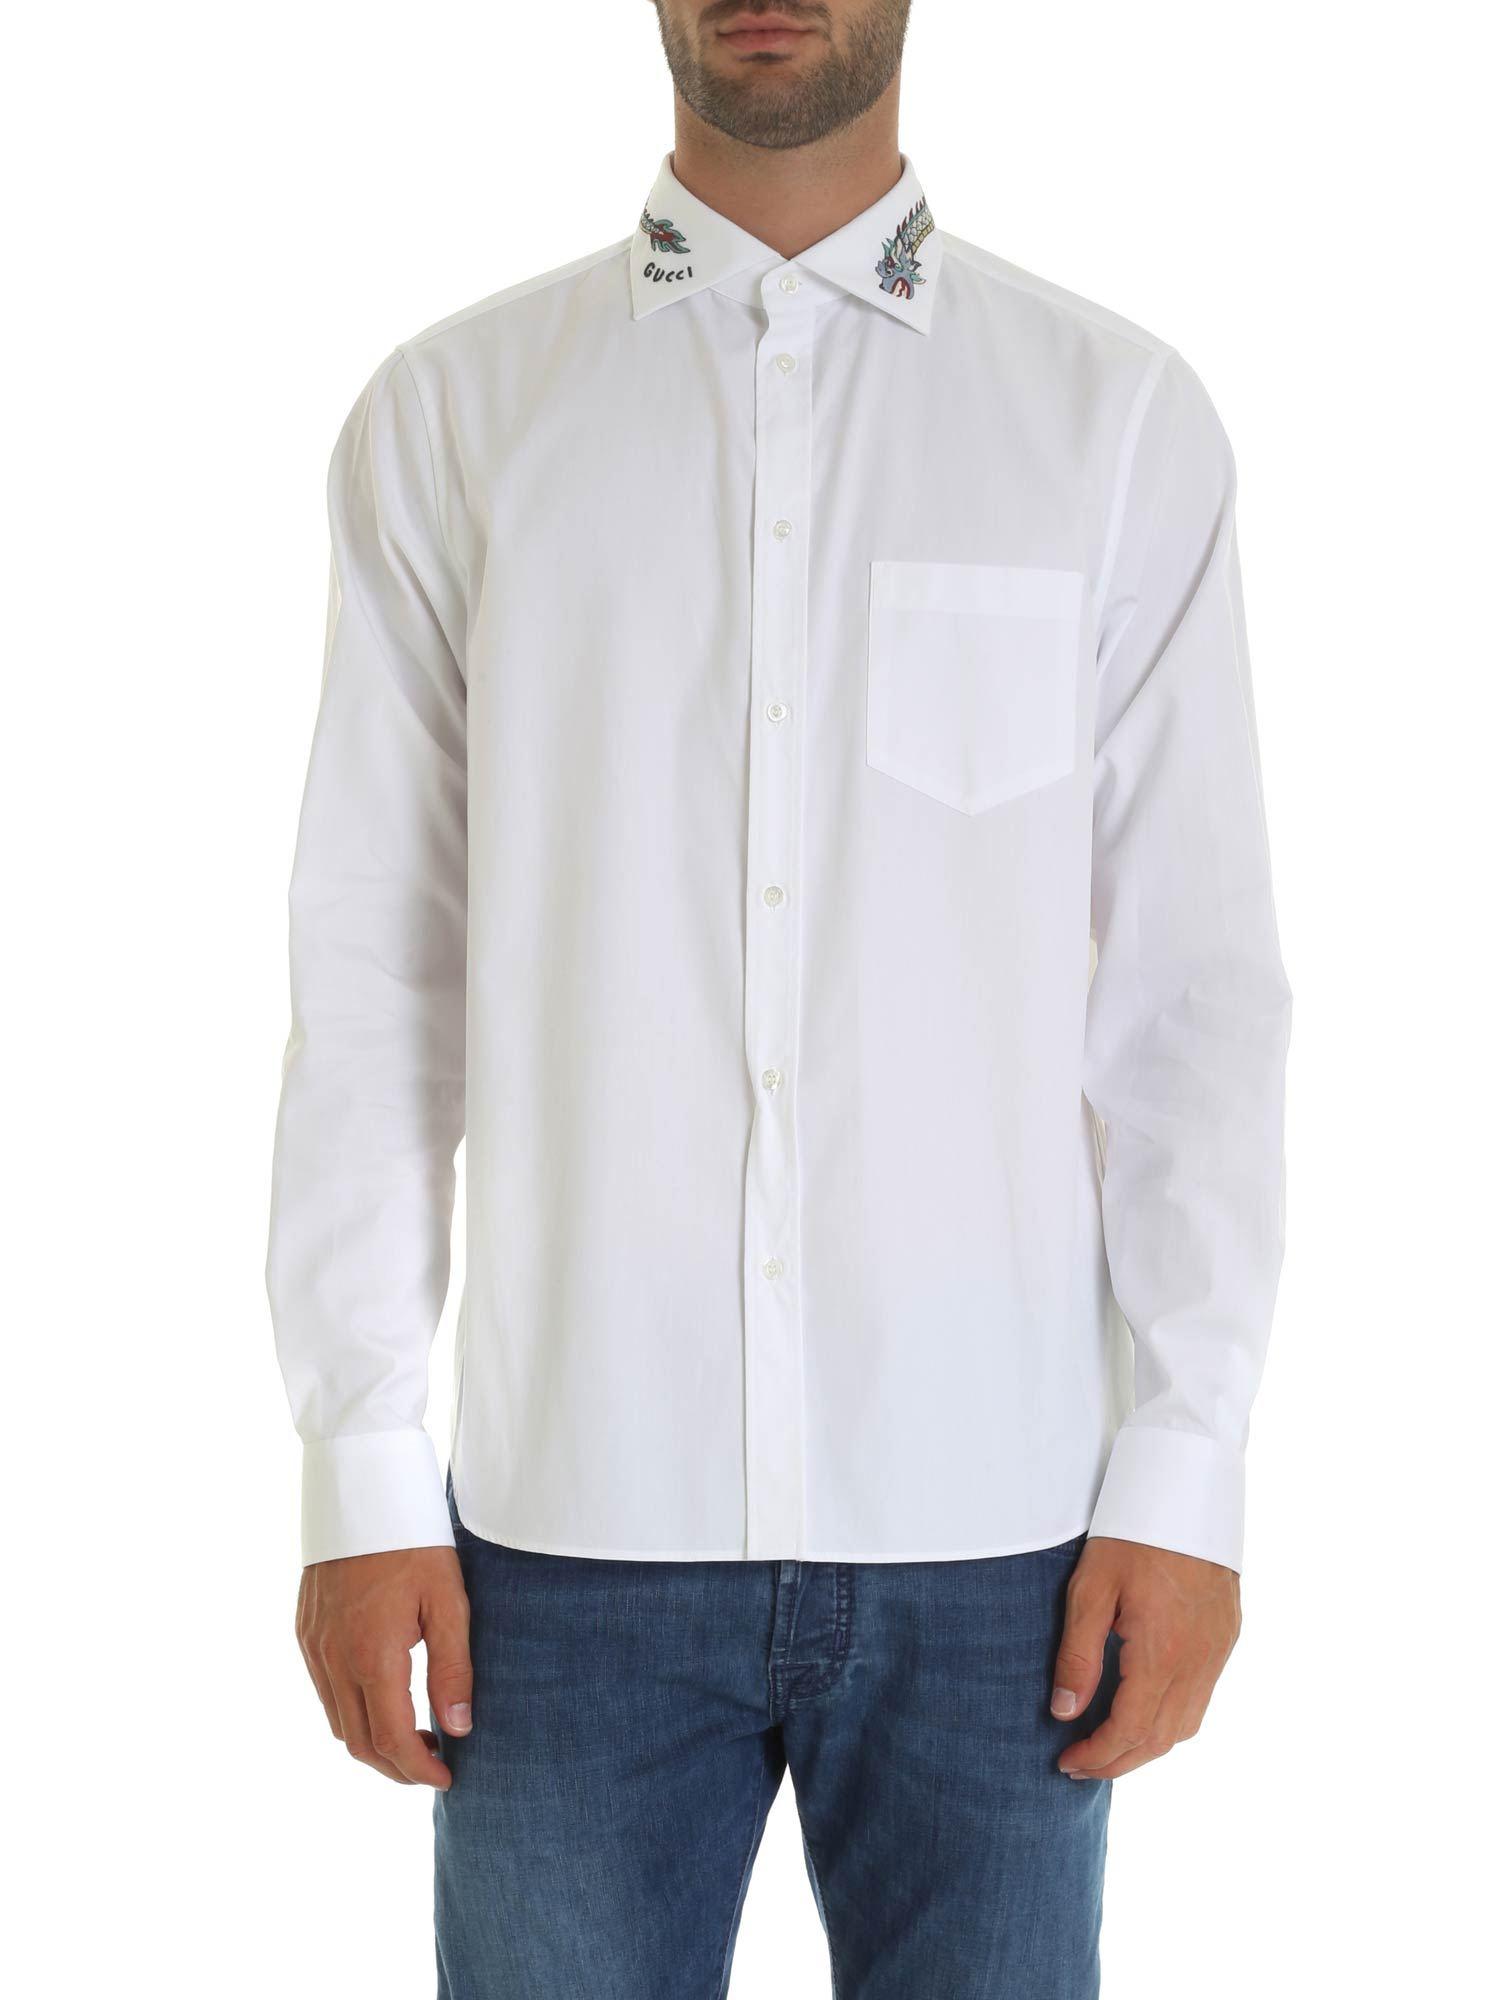 Gucci Cotton Shirt In White With Embroidered Collar for Men - Lyst